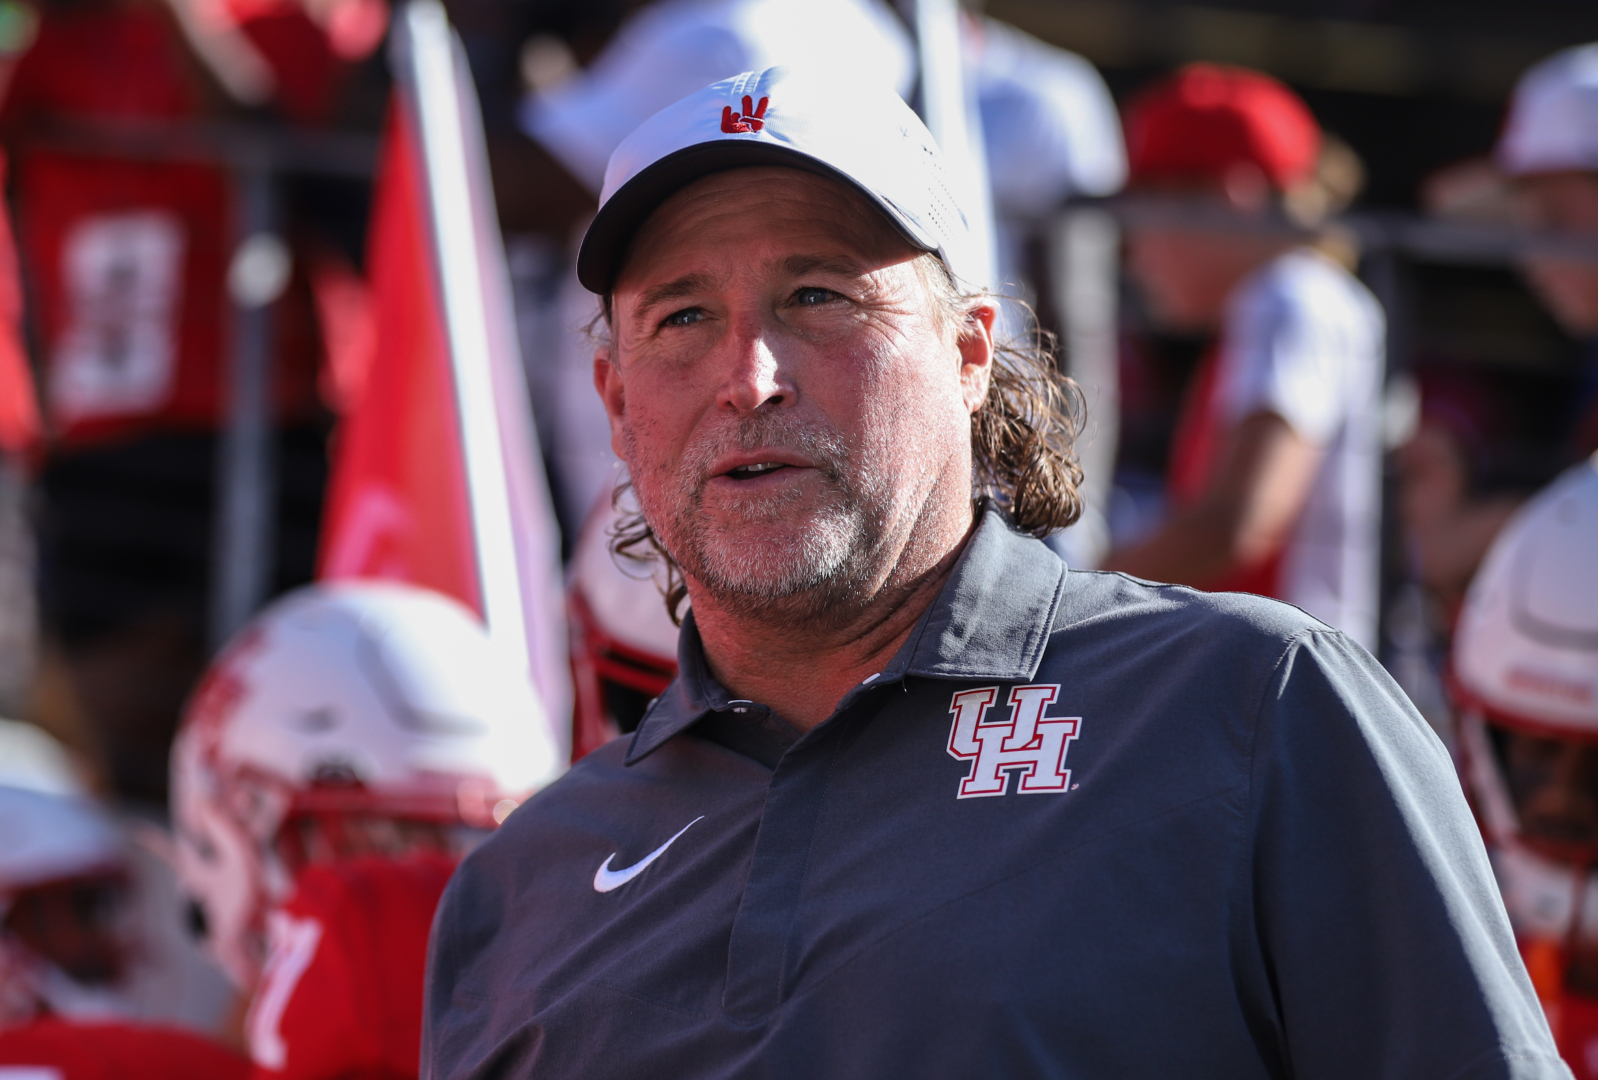 In all of his 32 years of coaching, Dana Holgorsen said he's seen things he's never seen before through UH's first four games of 2022. | Sean Thomas/The Cougar